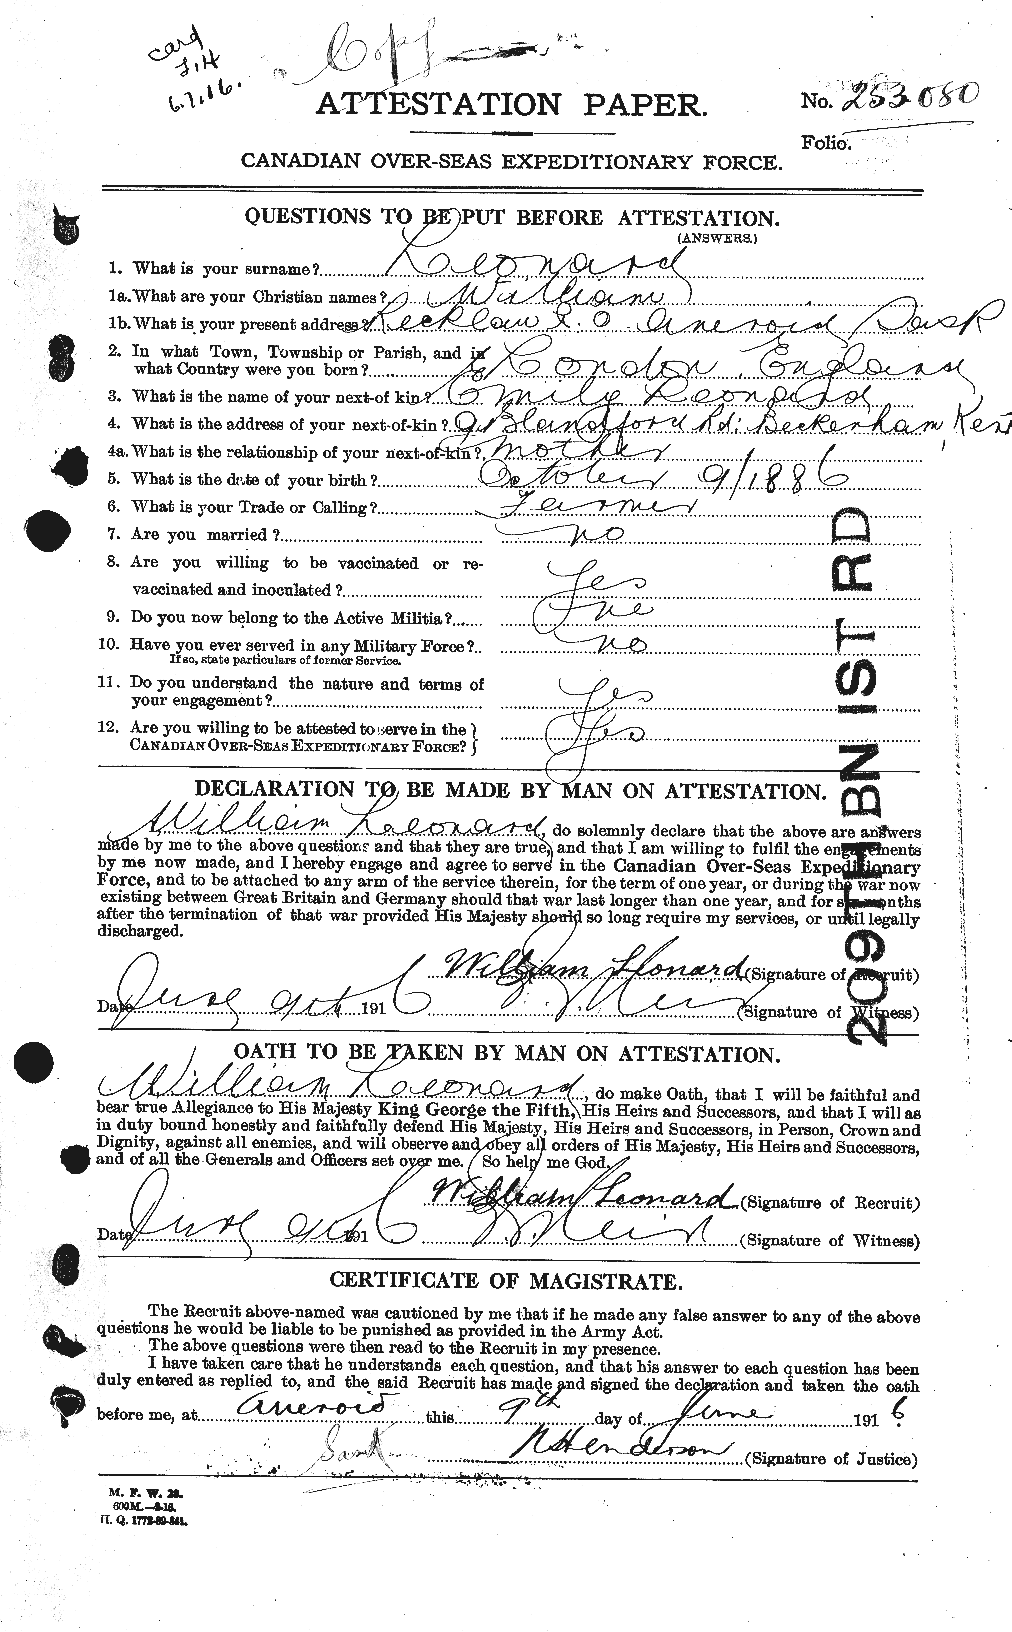 Personnel Records of the First World War - CEF 460872a